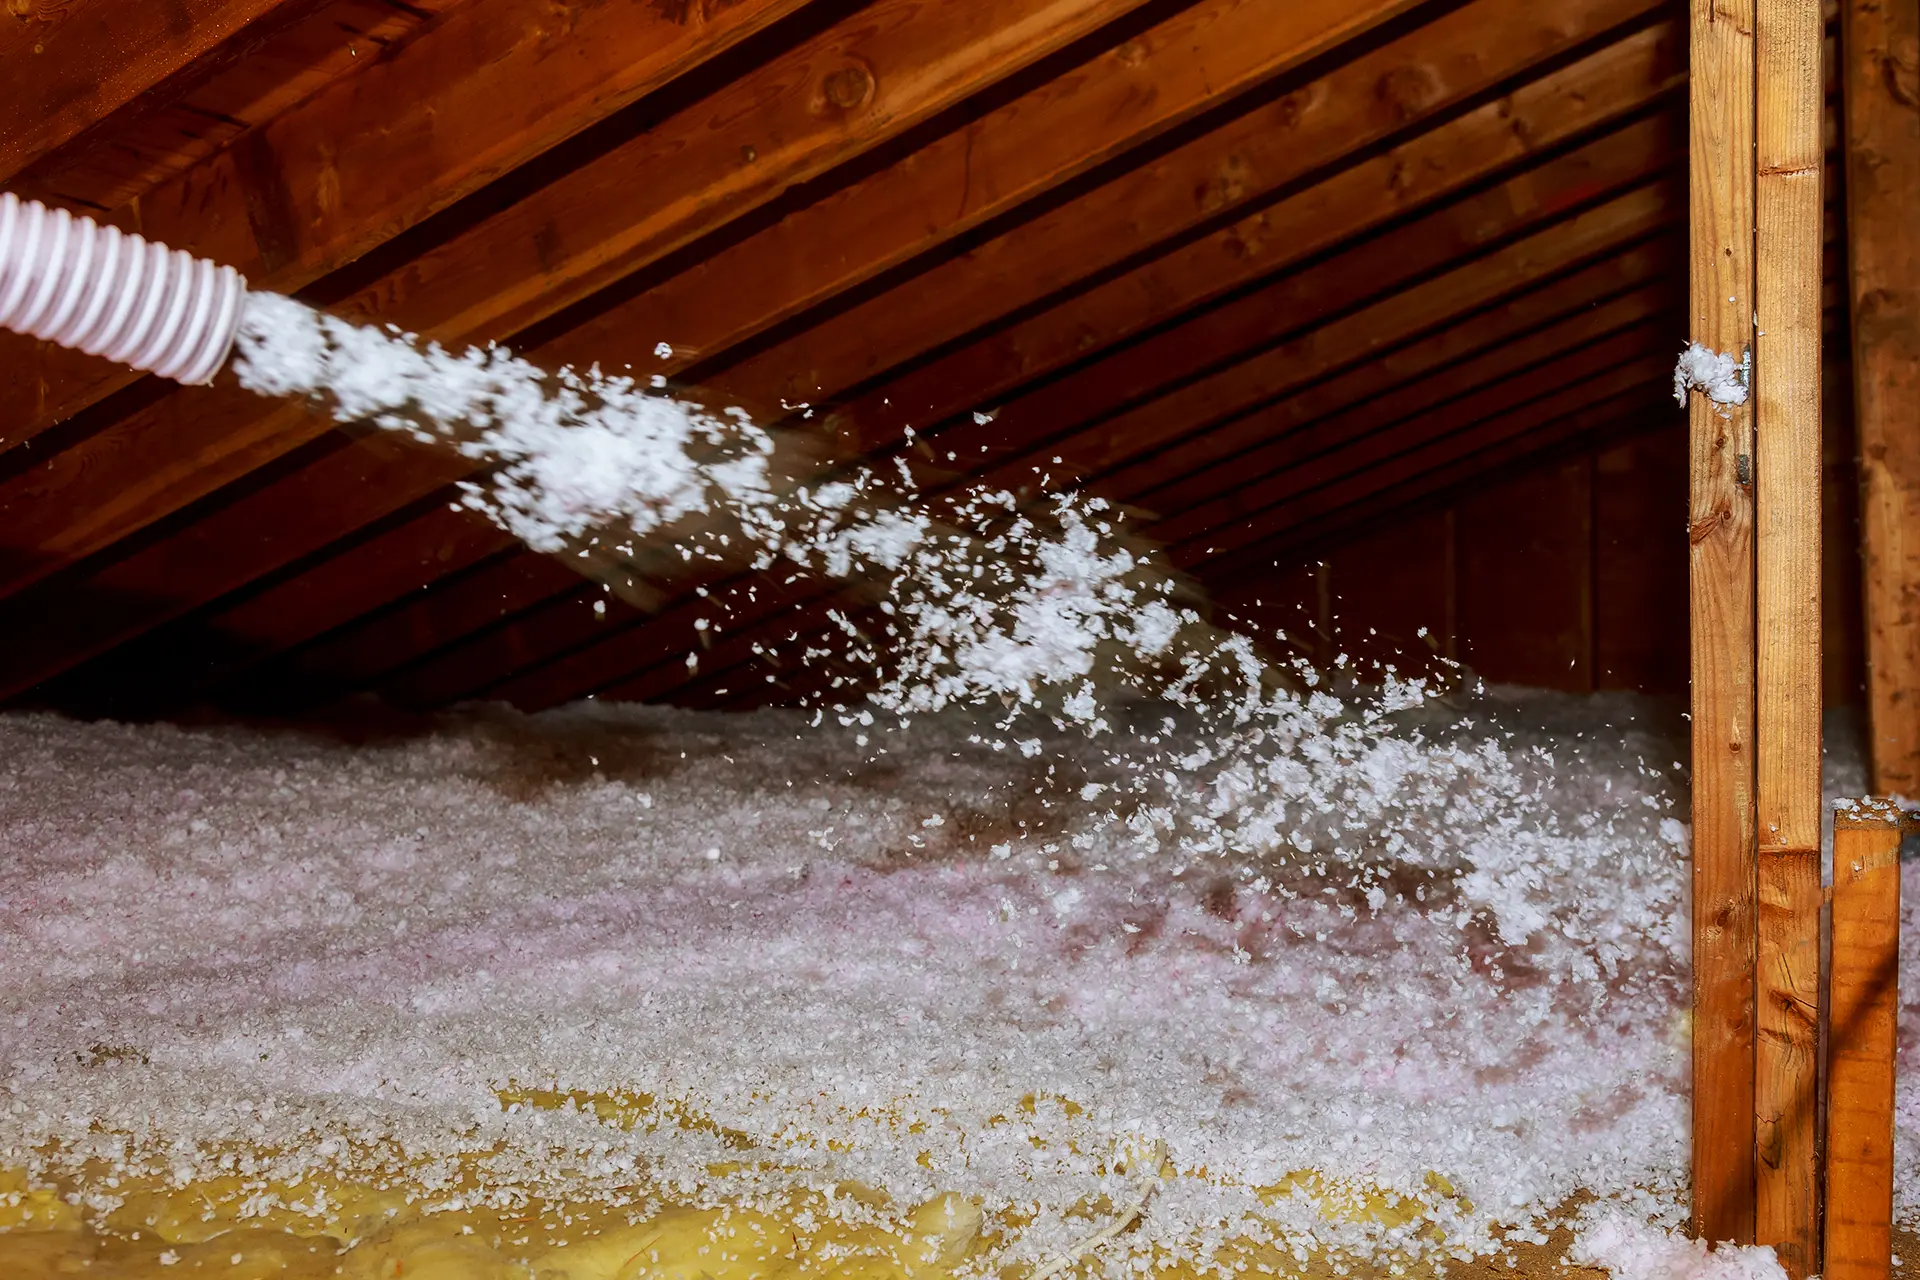 Installing blow in insulation